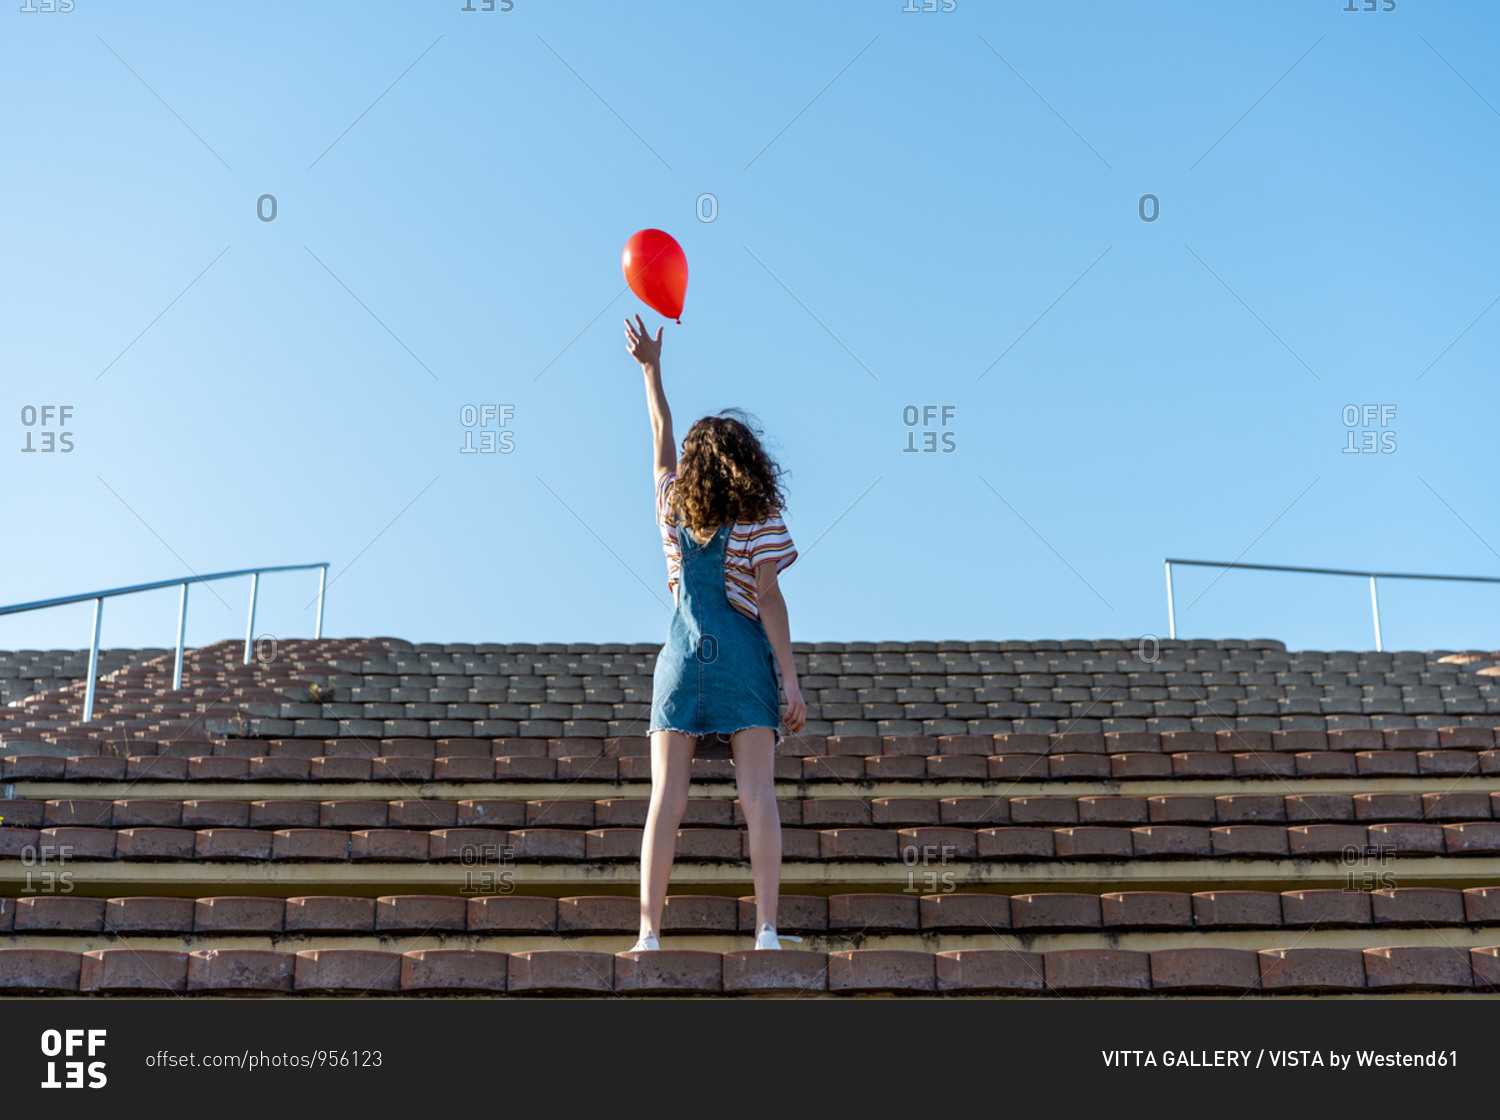 Young woman standing on grandstand- letting go of a red balloon